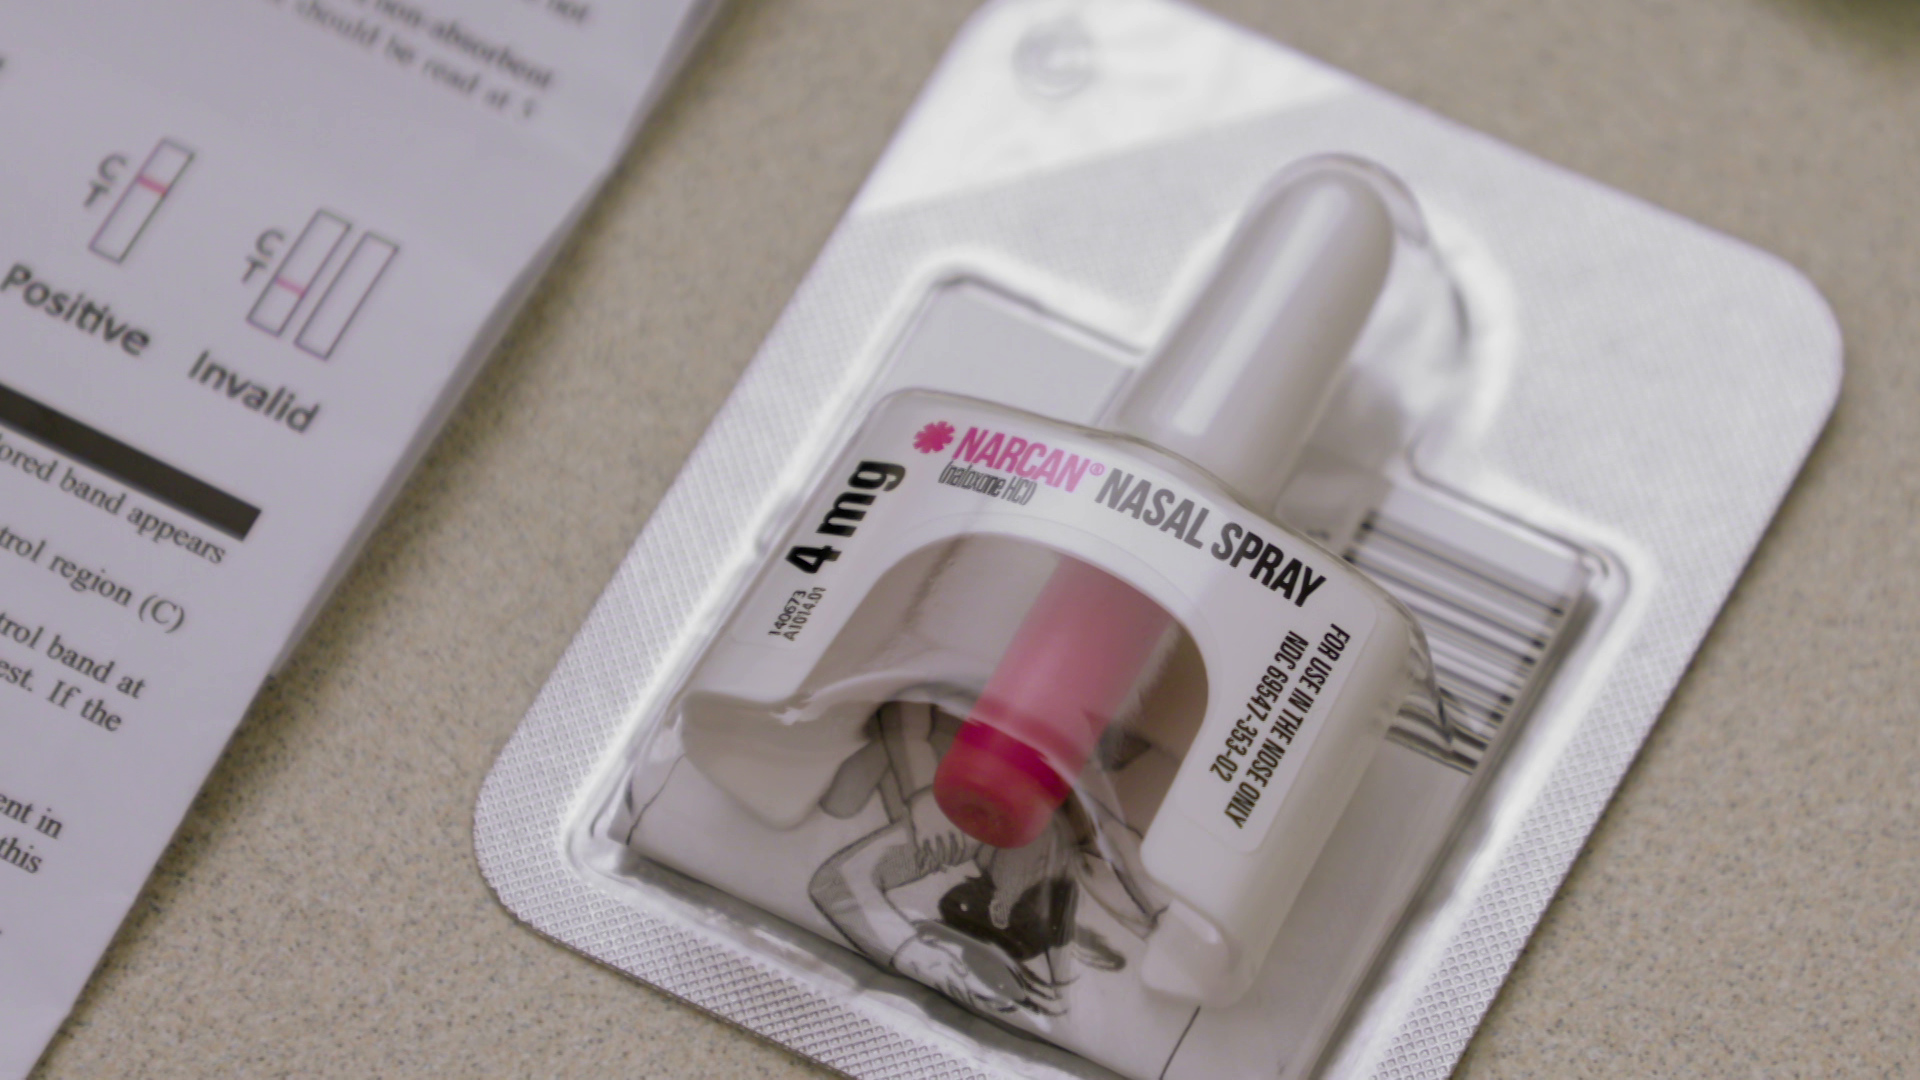 A plastic blister pack encases a 4 mg dose of Narcan nasal spray.